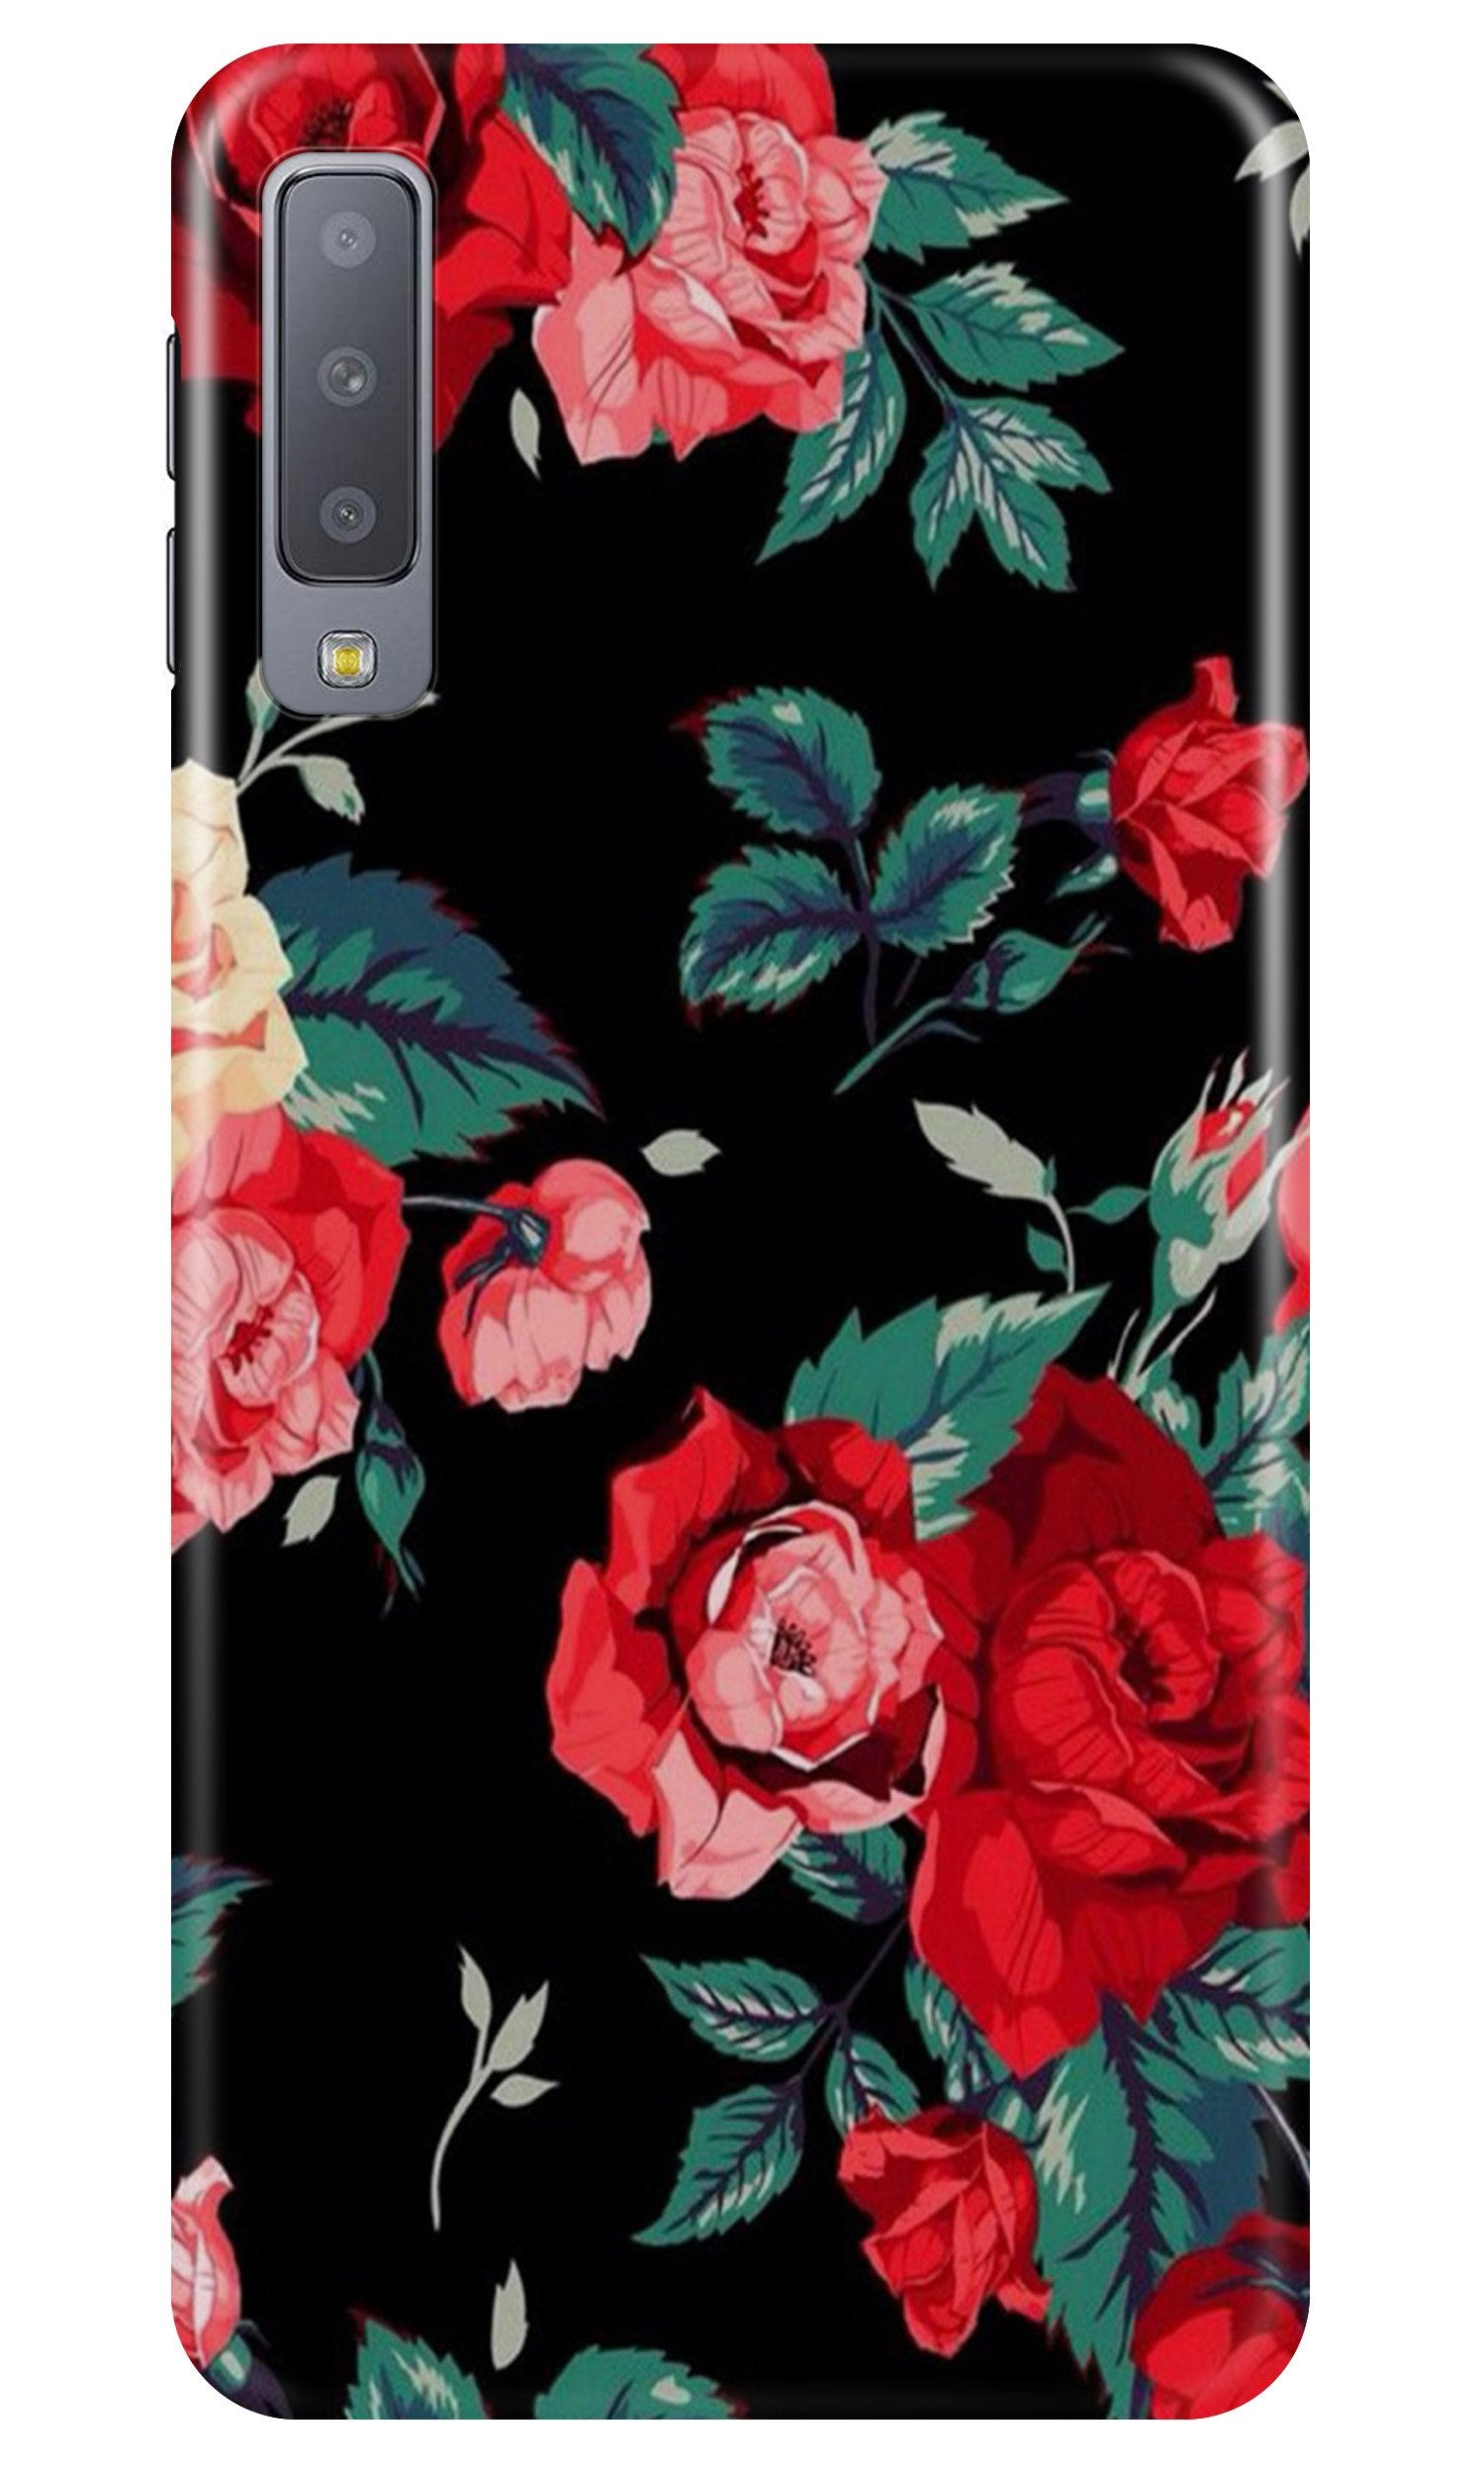 Red Rose2 Case for Samung Galaxy A70s